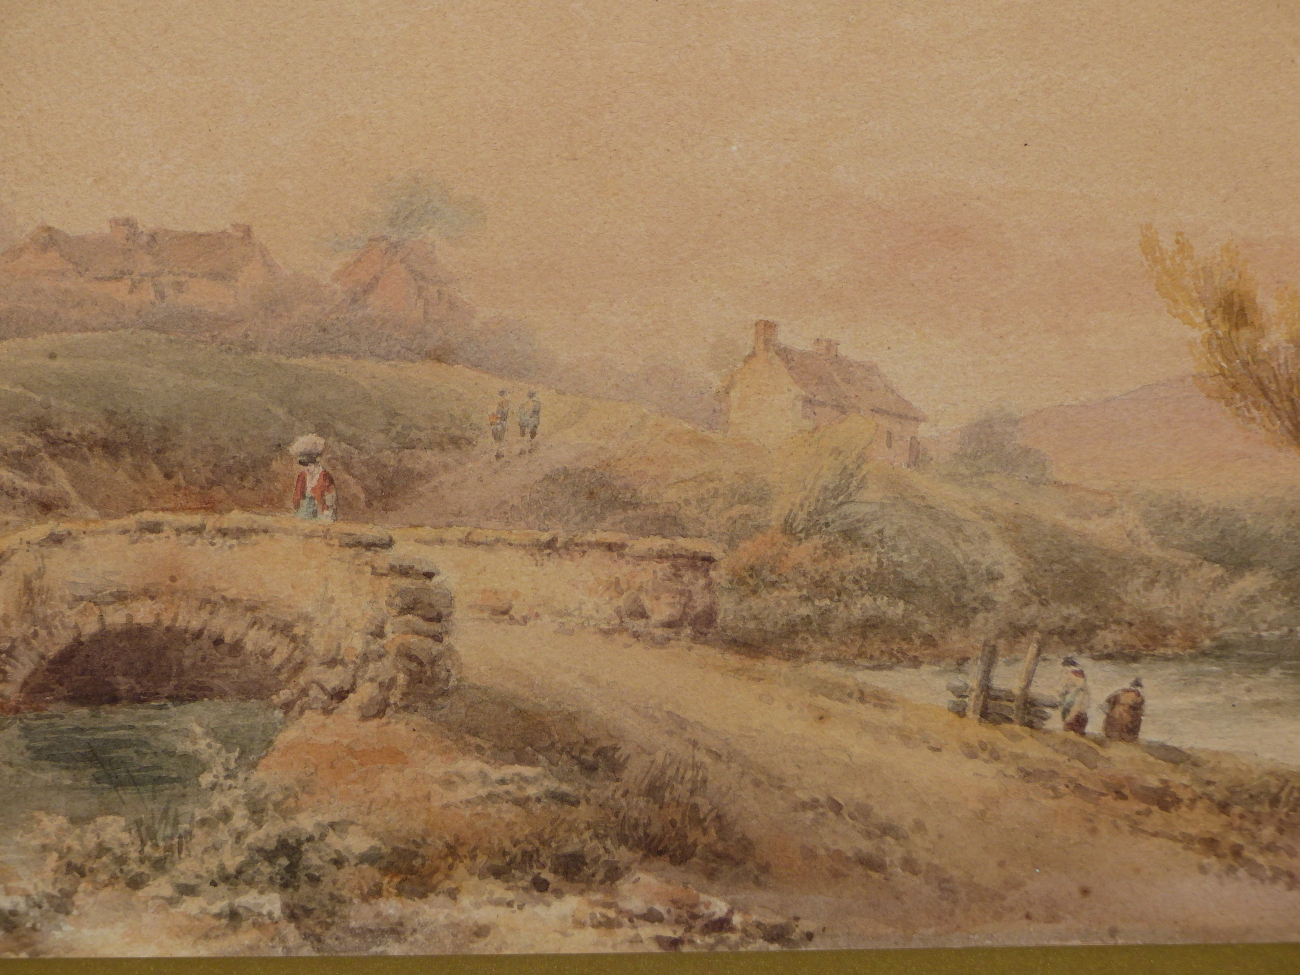 MANNER OF DAVID COX, FIGURES IN A RURAL SCENE BY A BRIDGE OVER A RIVER, BEARS SIGNATURE AND DATE